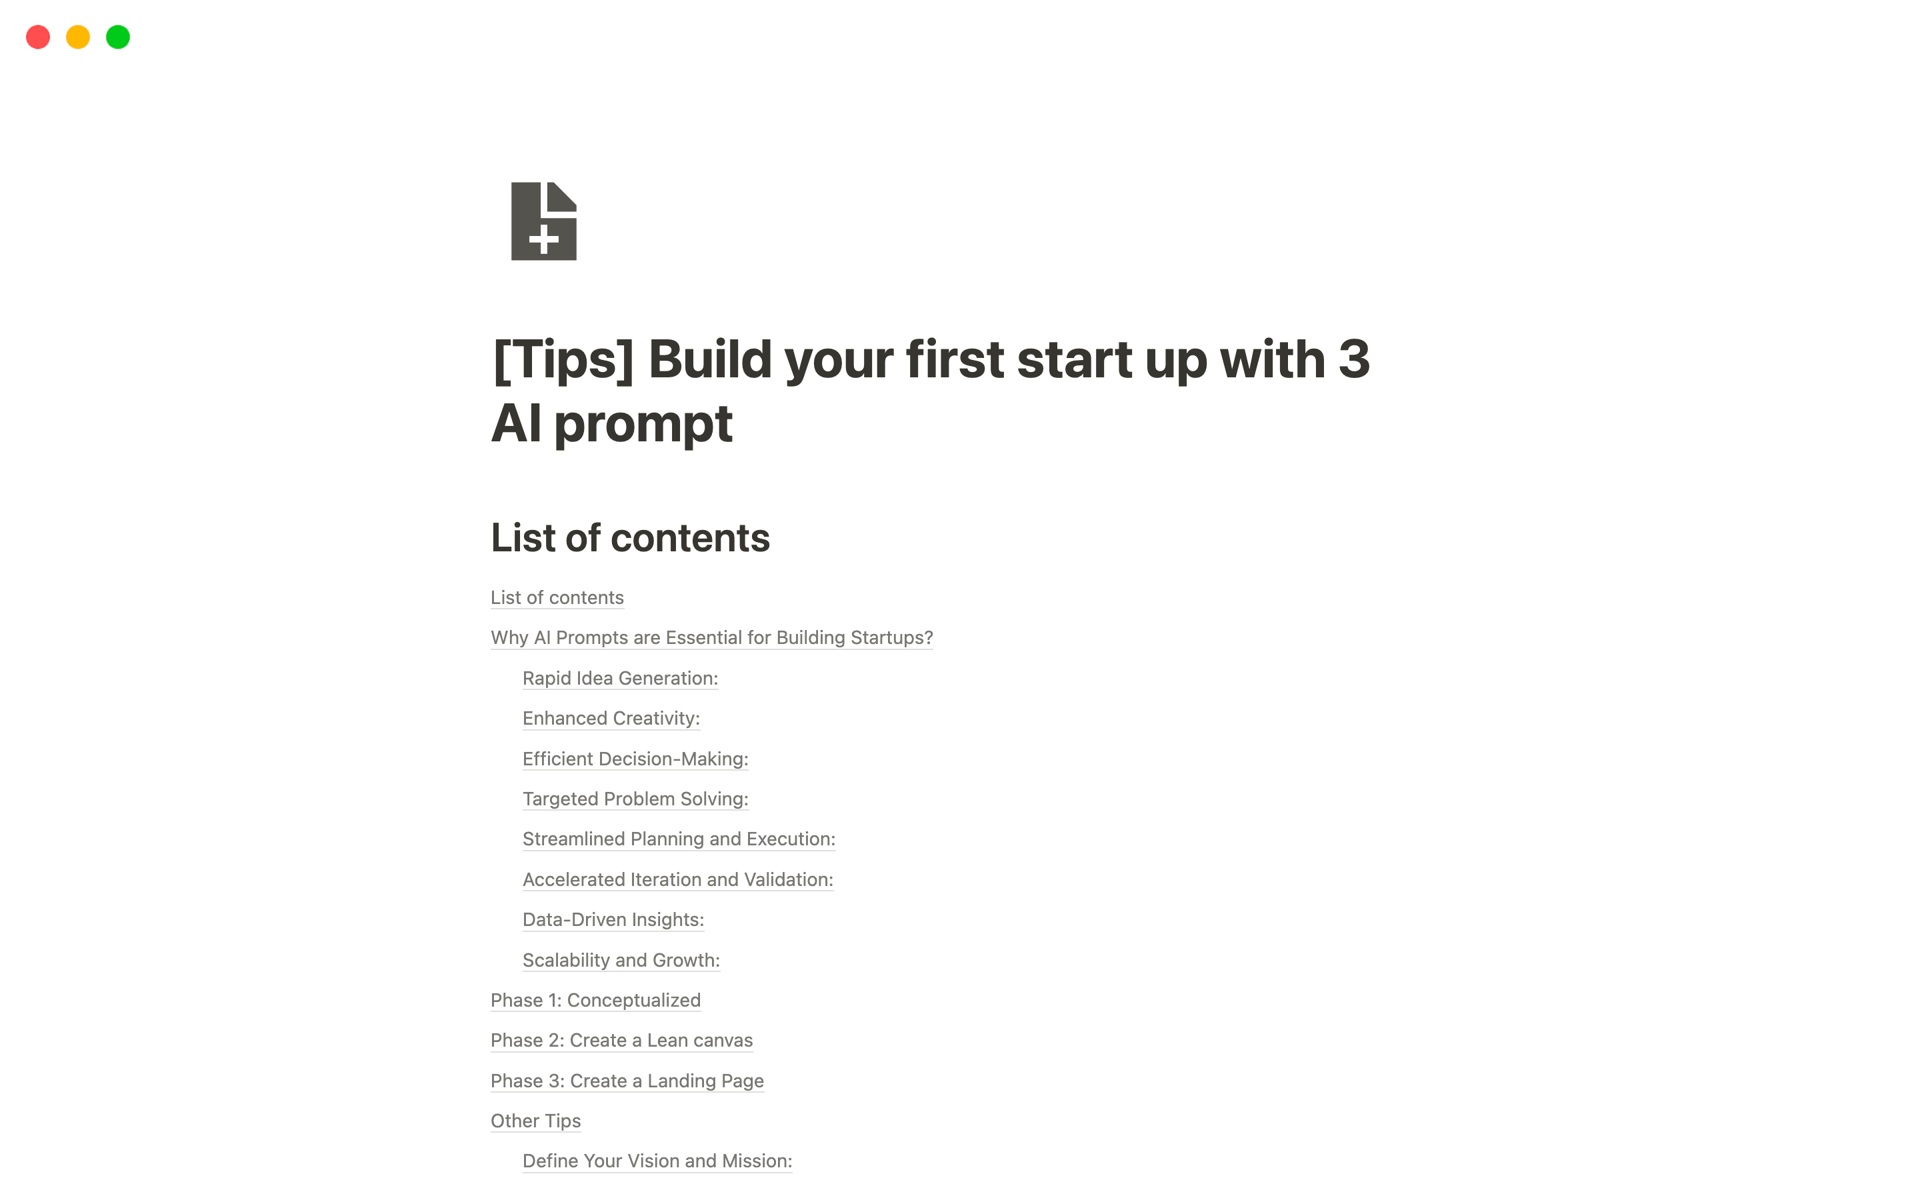 Build your first start up with 3 AI promptsのテンプレートのプレビュー